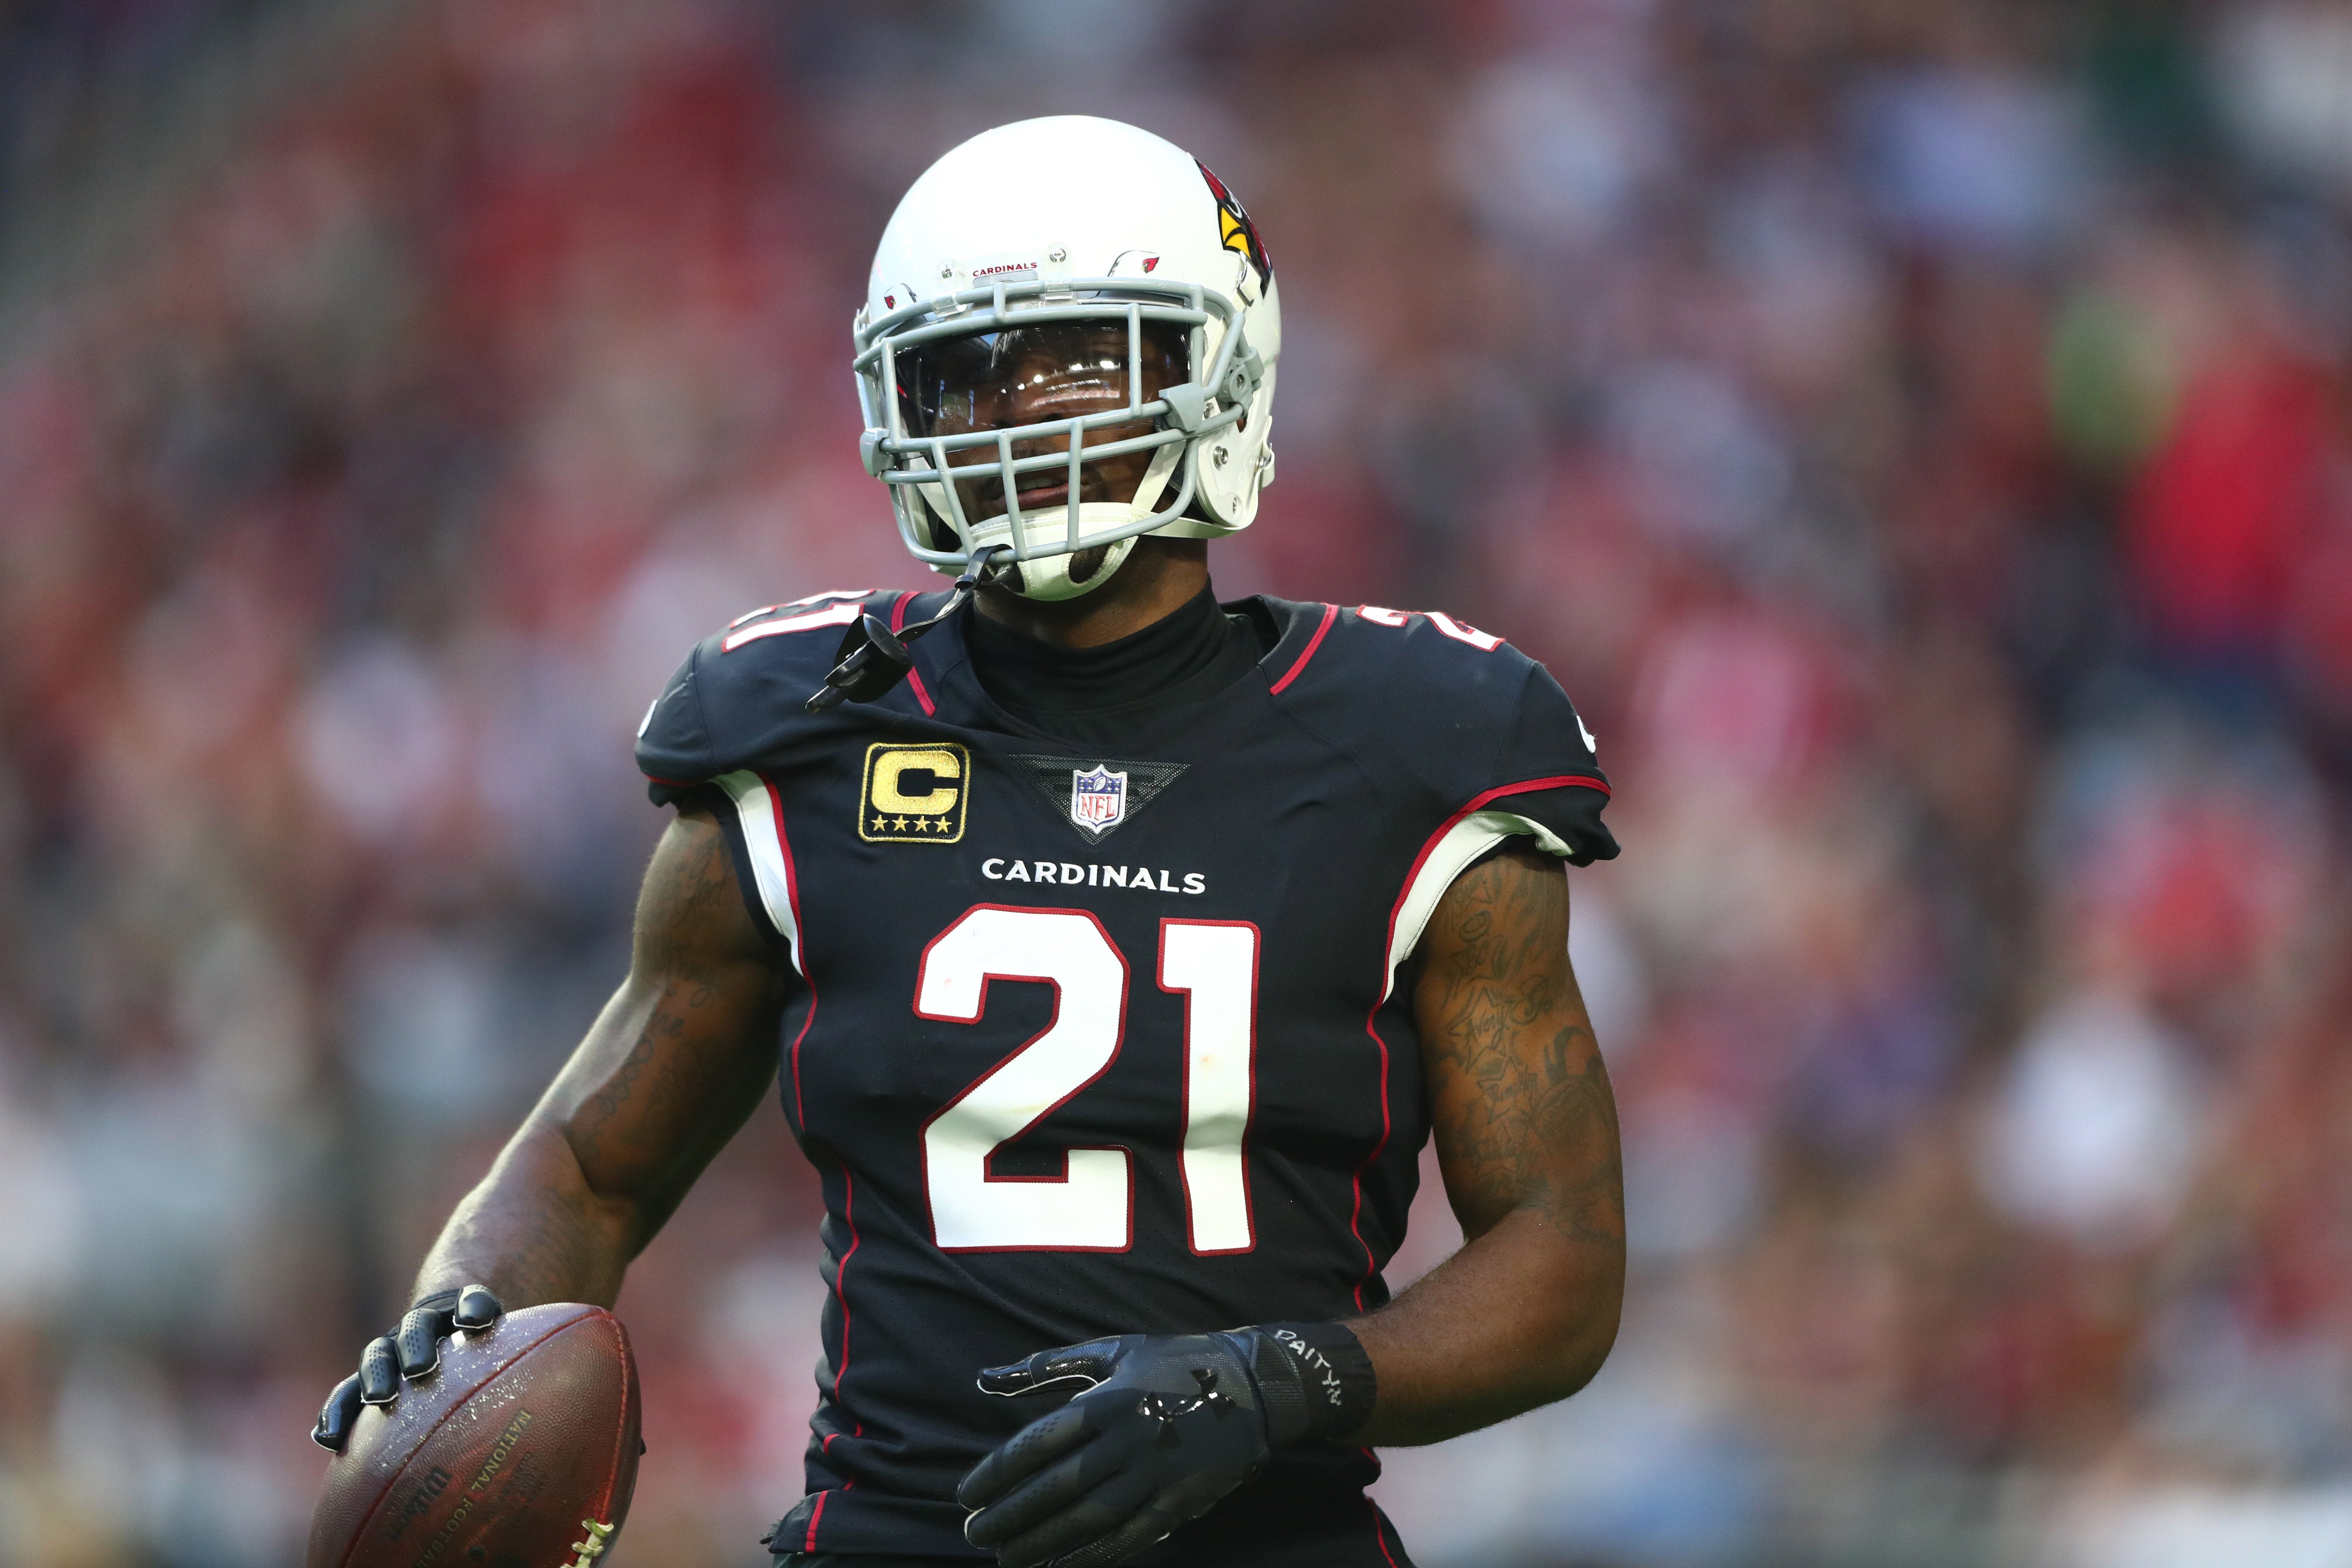 Patrick Peterson Other Nfl Players Linked To Peds Shouldnt